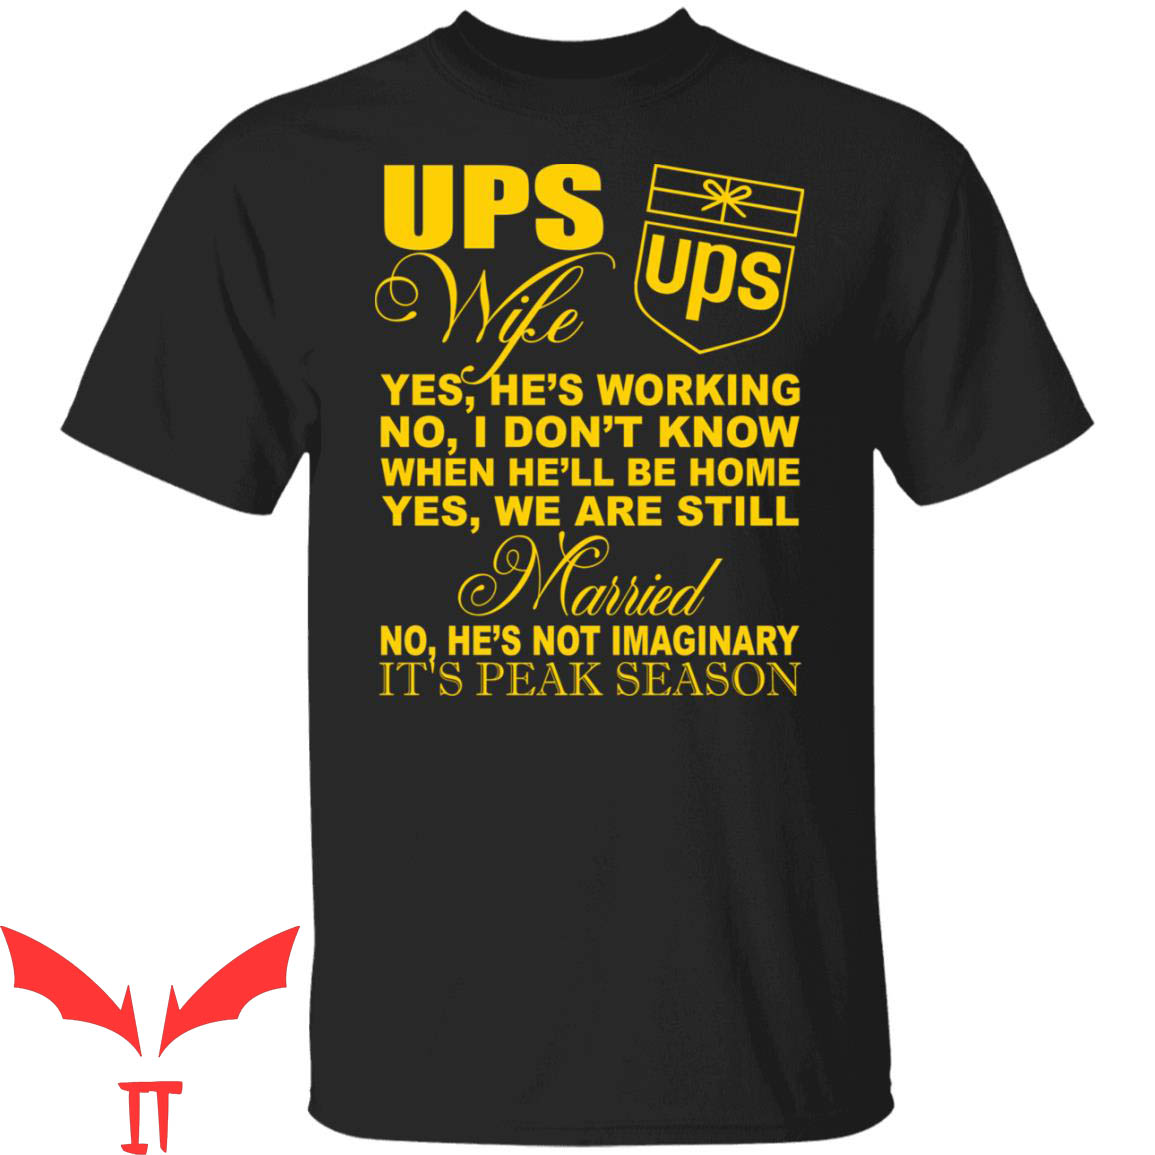 Ups T-Shirt Ups Wife Yes He's Working No I Don't Know When